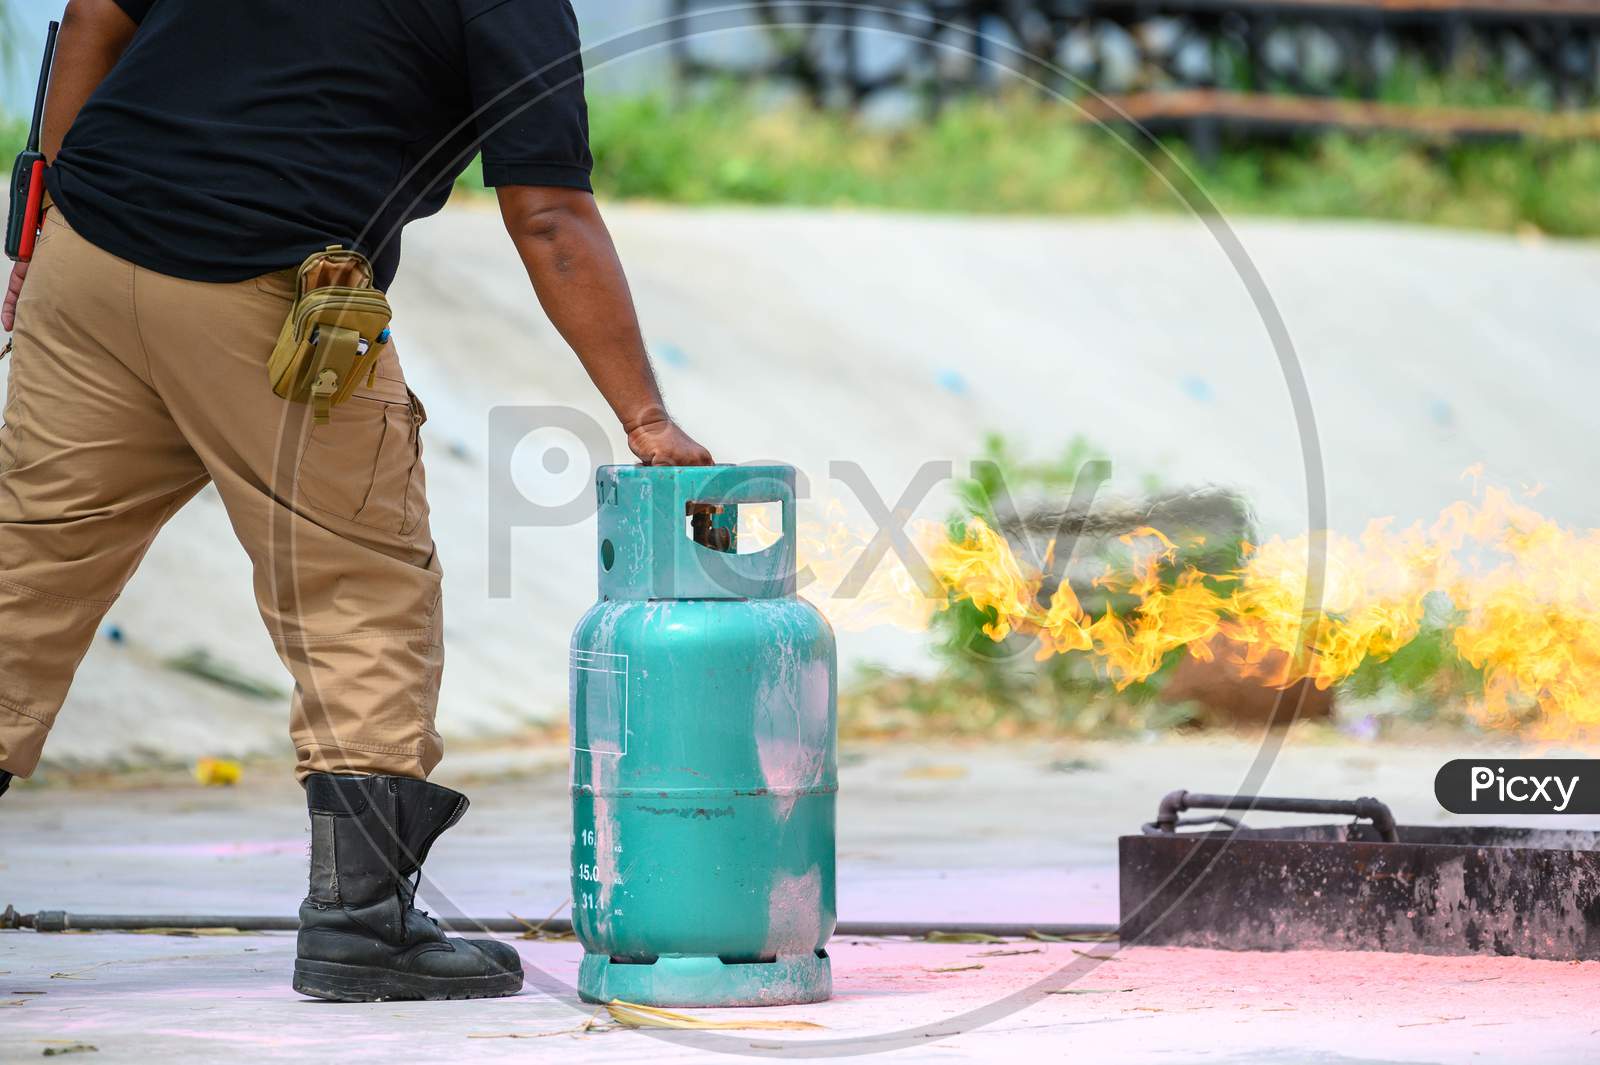 Closeup Of Firefighters Lower Body Training For Fire Drill By Demonstrate How To Close The Gas Tank Valve Correctly. Security Insurance Protection And Fire Fighter Concept. Occupation And Volunteer